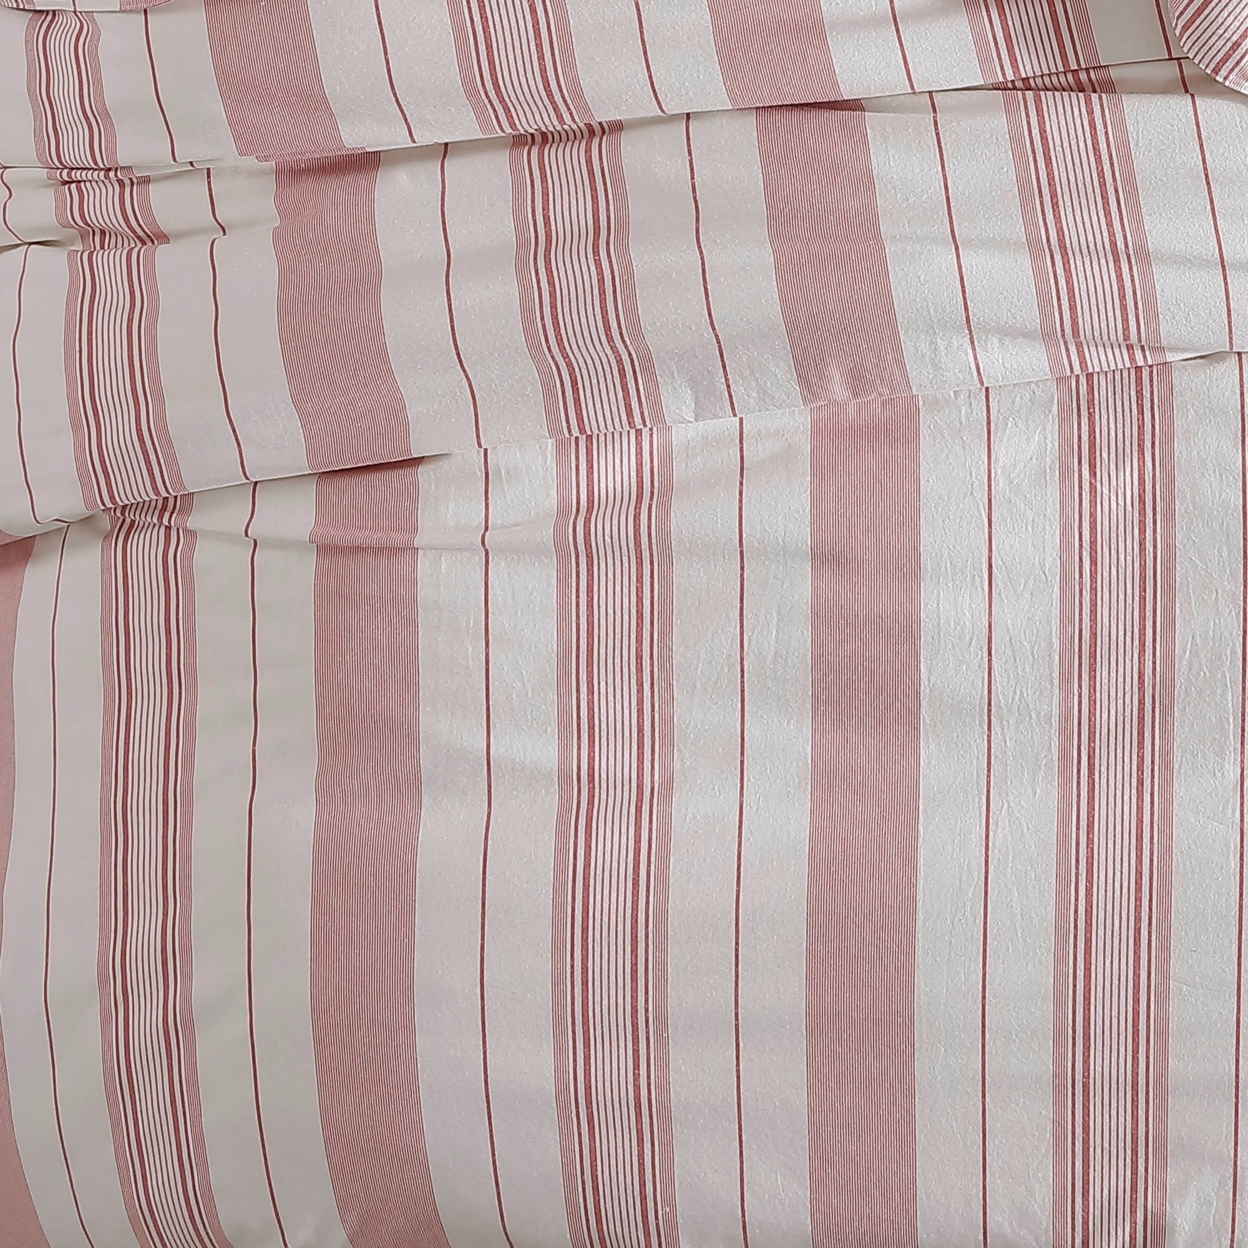 3 Piece Queen Comforter Set With Vertical Stripes Pattern, White And Pink- Saltoro Sherpi